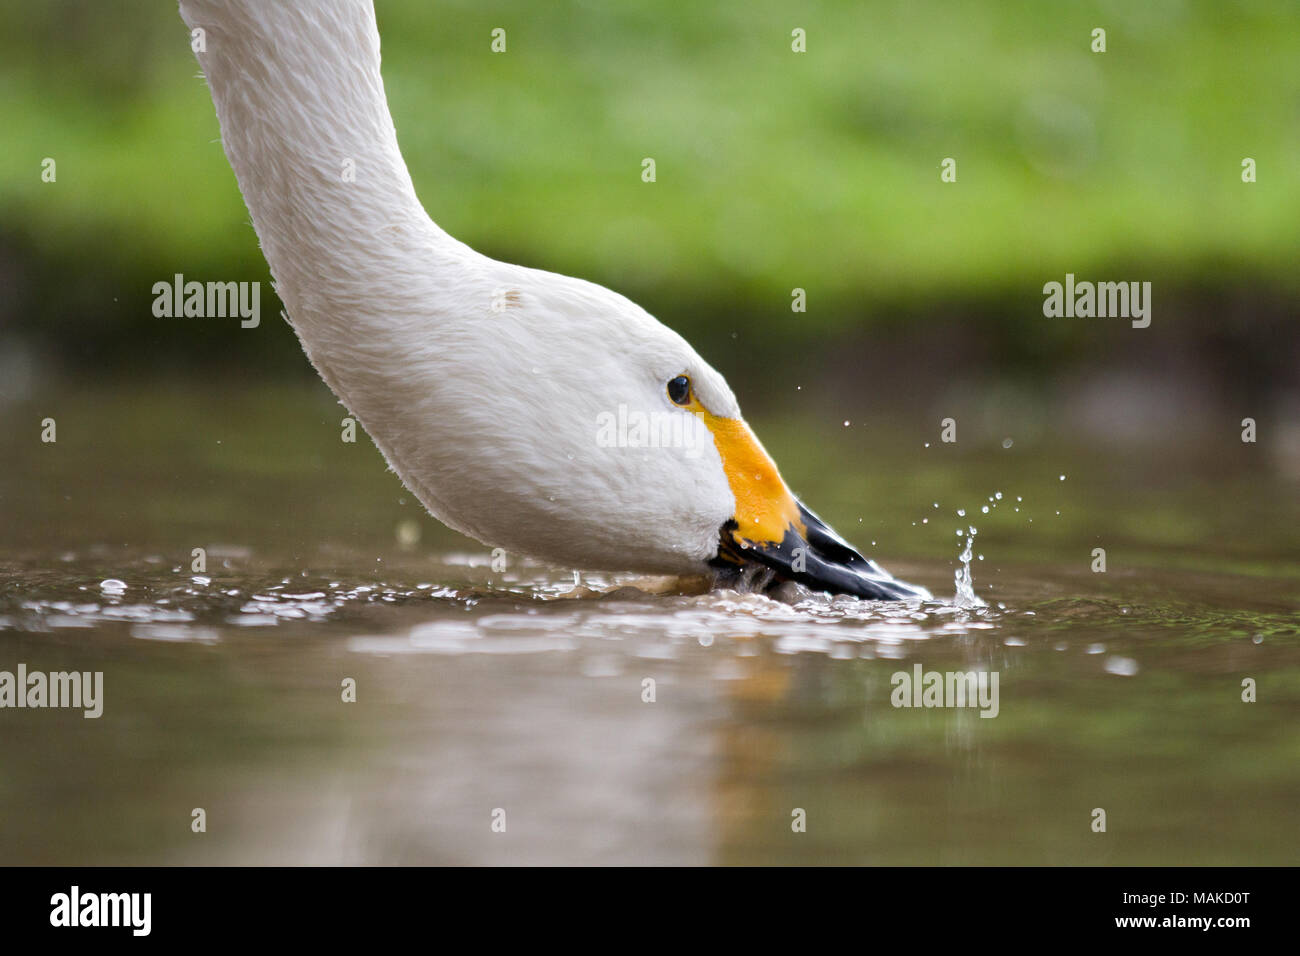 Whooper Swan having a drink from a puddle, Gloucestershire, UK Stock Photo